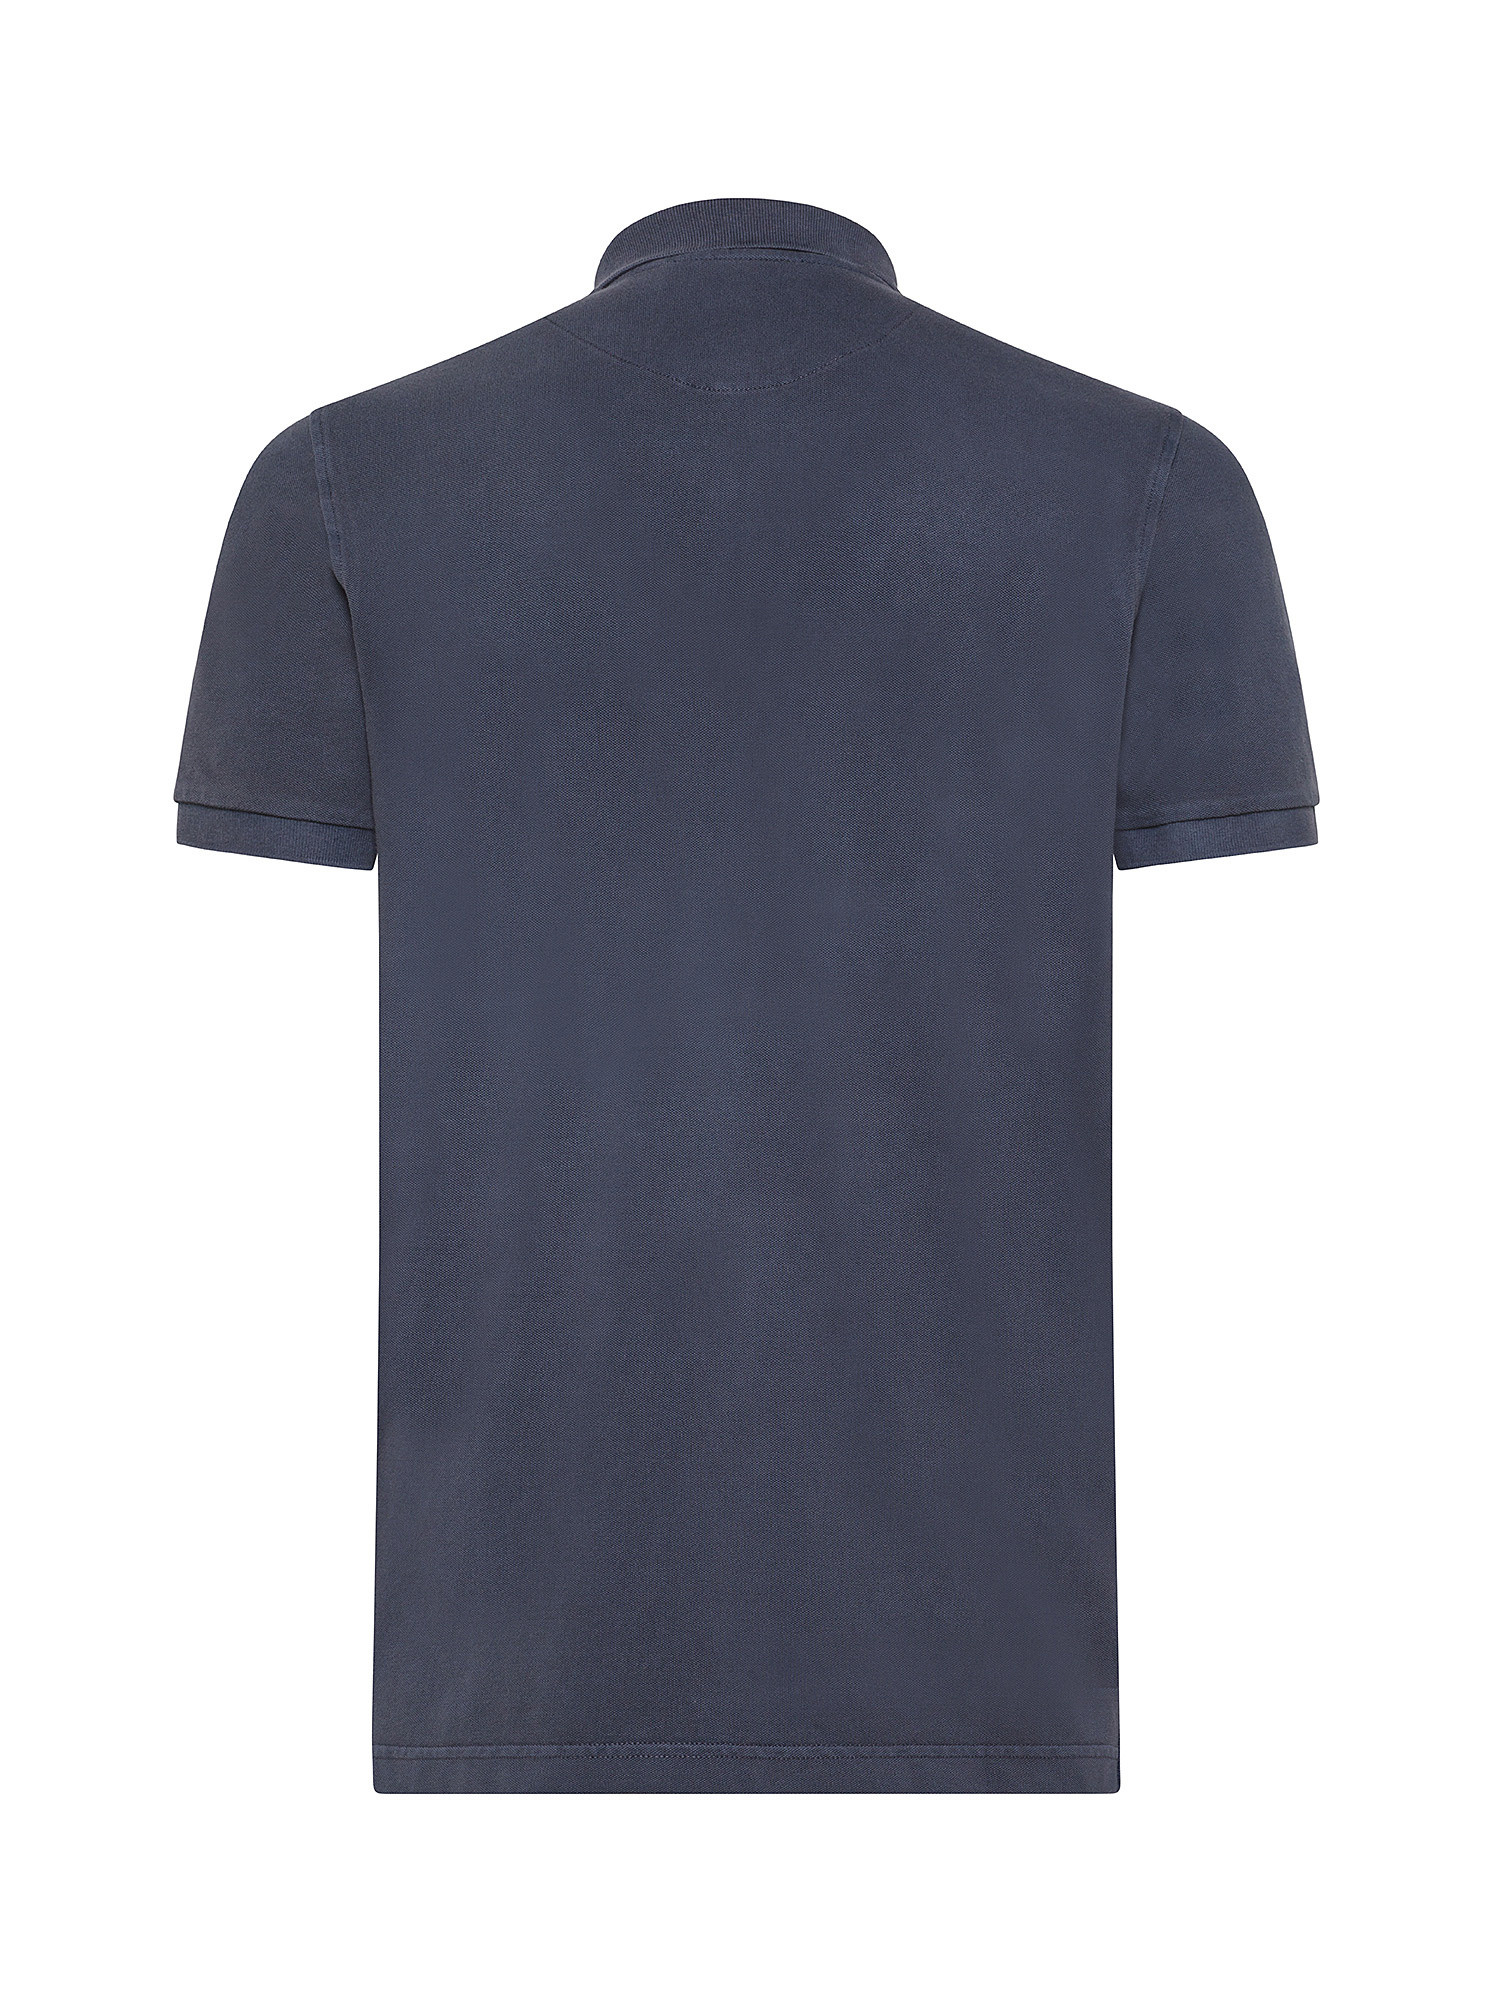 Manuel Ritz - Garment-dyed polo shirt in stretch cotton with logo, Dark Blue, large image number 1